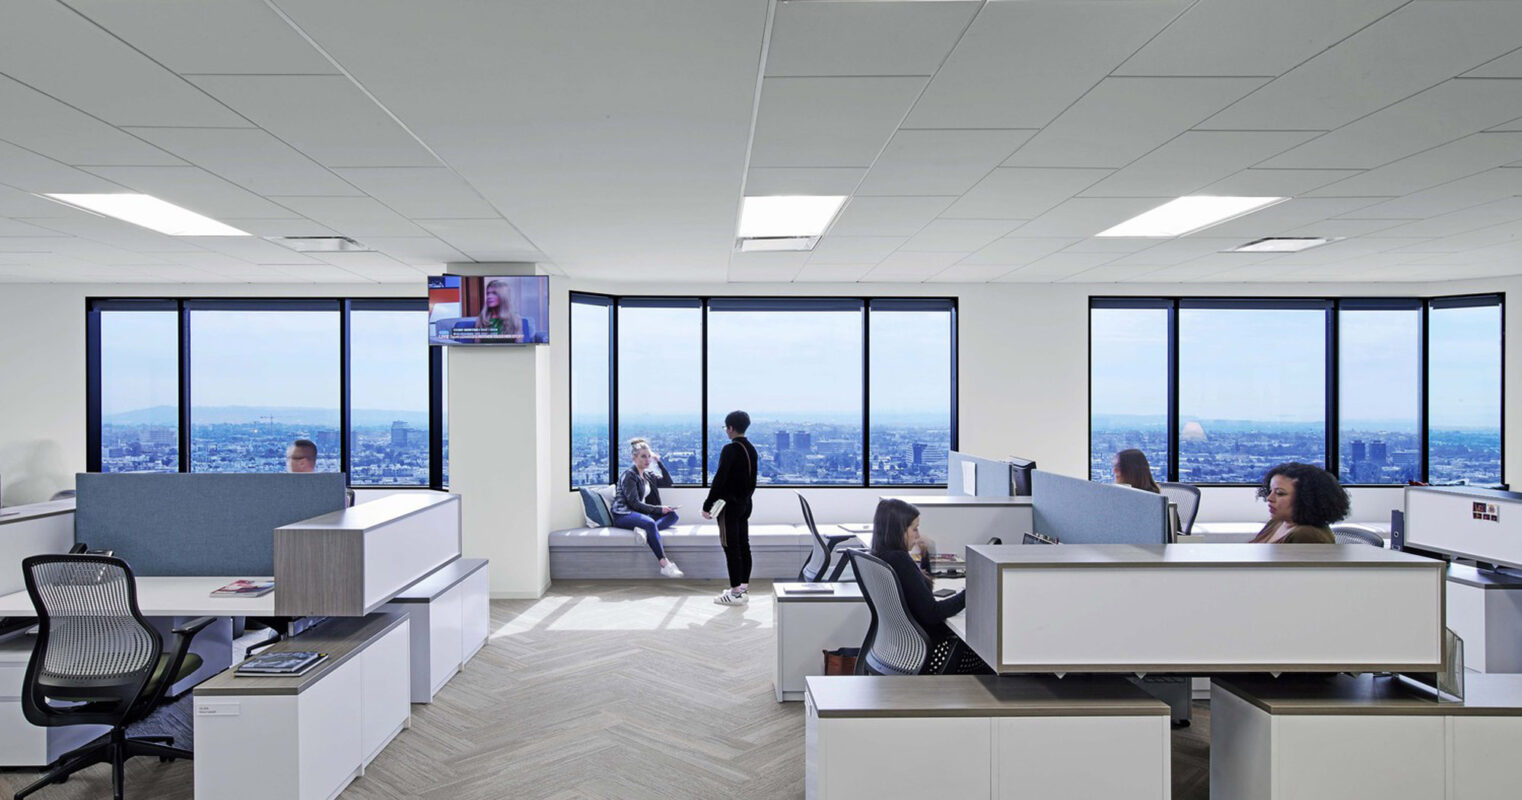 Modern office space with ergonomic workstations, carpeted floors, and expansive windows offering an urban skyline view. Collaborative seating areas are interspersed, enhancing the open-plan layout. Ambient lighting complements the natural daylight, fostering a productive work environment.